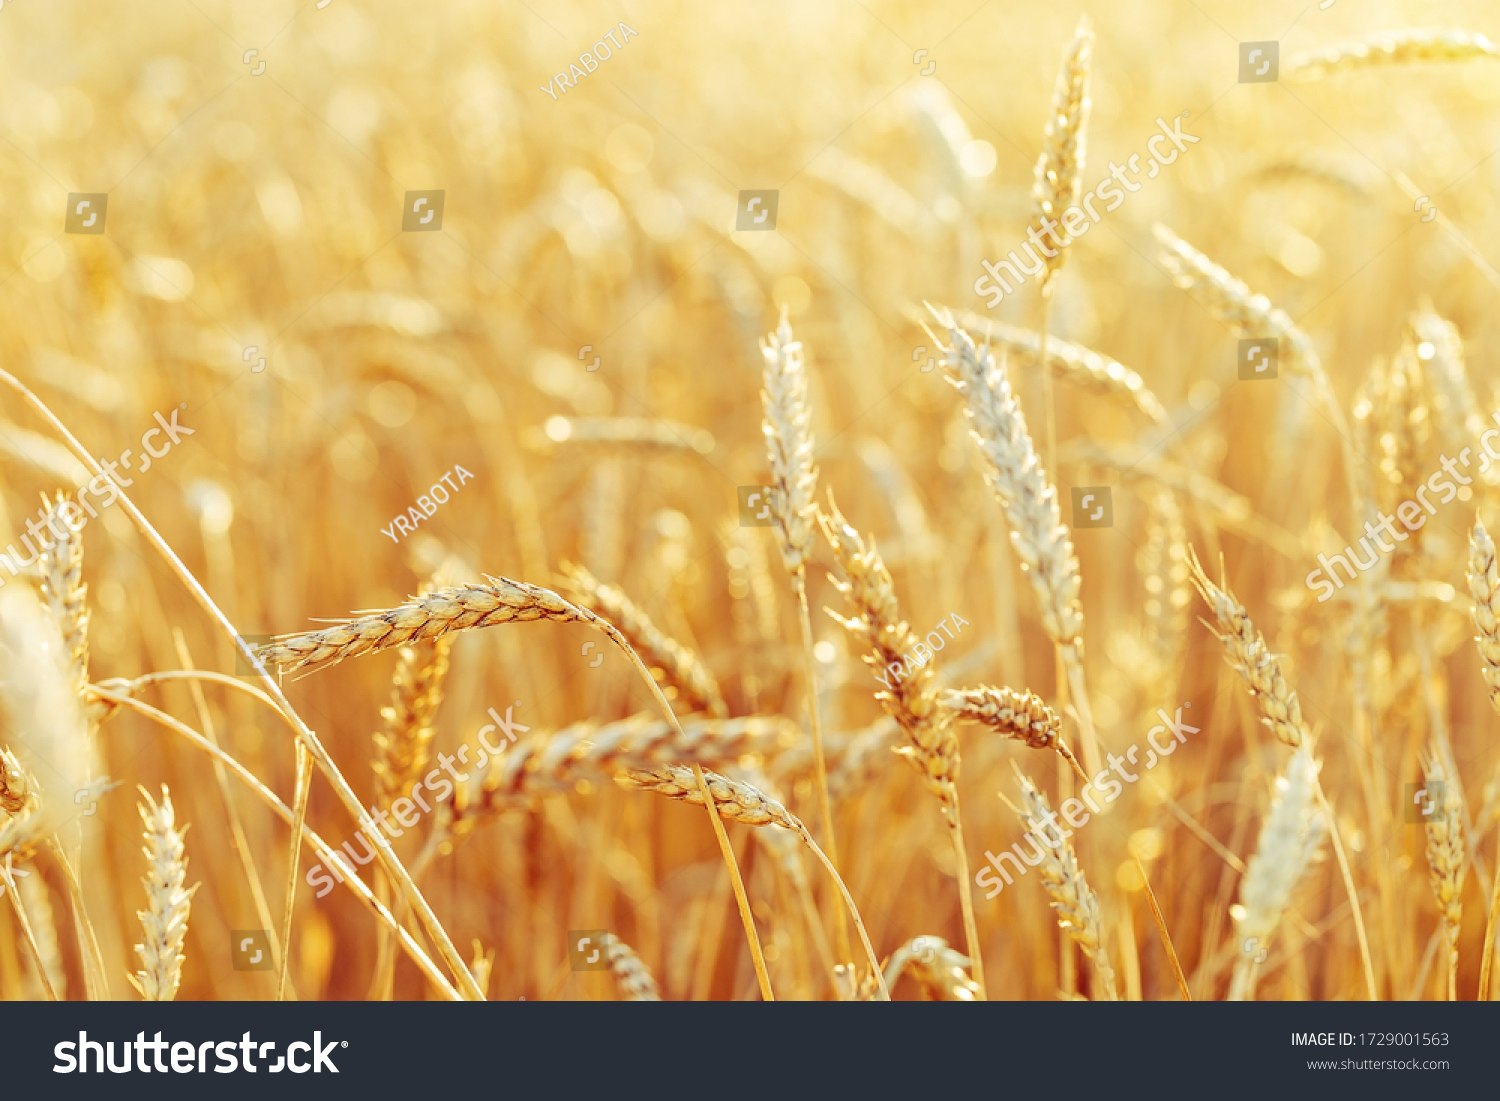 Rural scenery. Background of ripening ears of wheat field and sunlight. Crops field. Selective focus. Field landscape. #1729001563